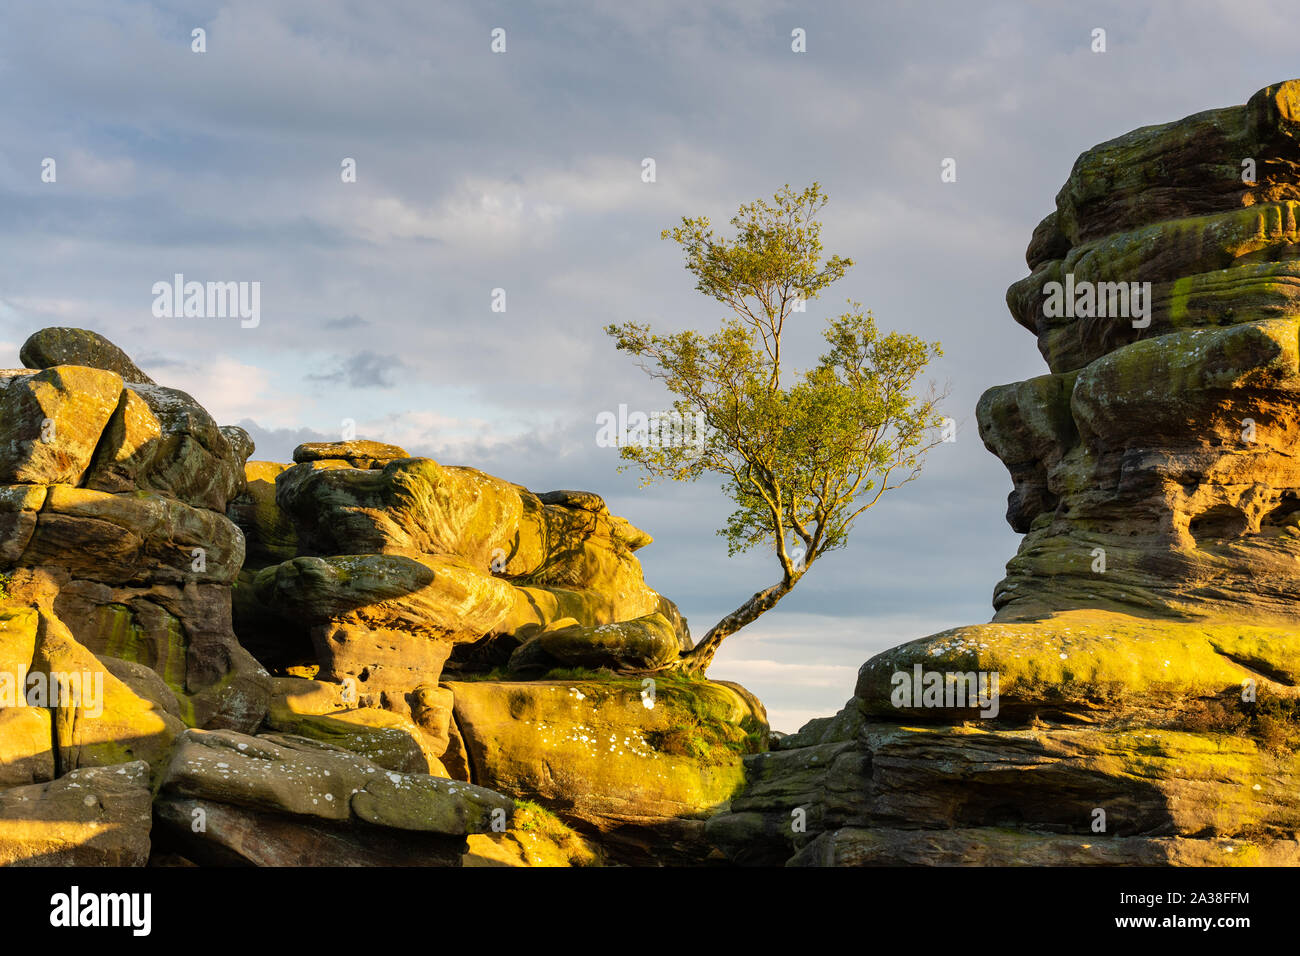 A lone tree clings to the edge of a gritstone rock outcrop during the evening golden hour at Brimham Rocks in Nidderdale, Yorkshire. Stock Photo